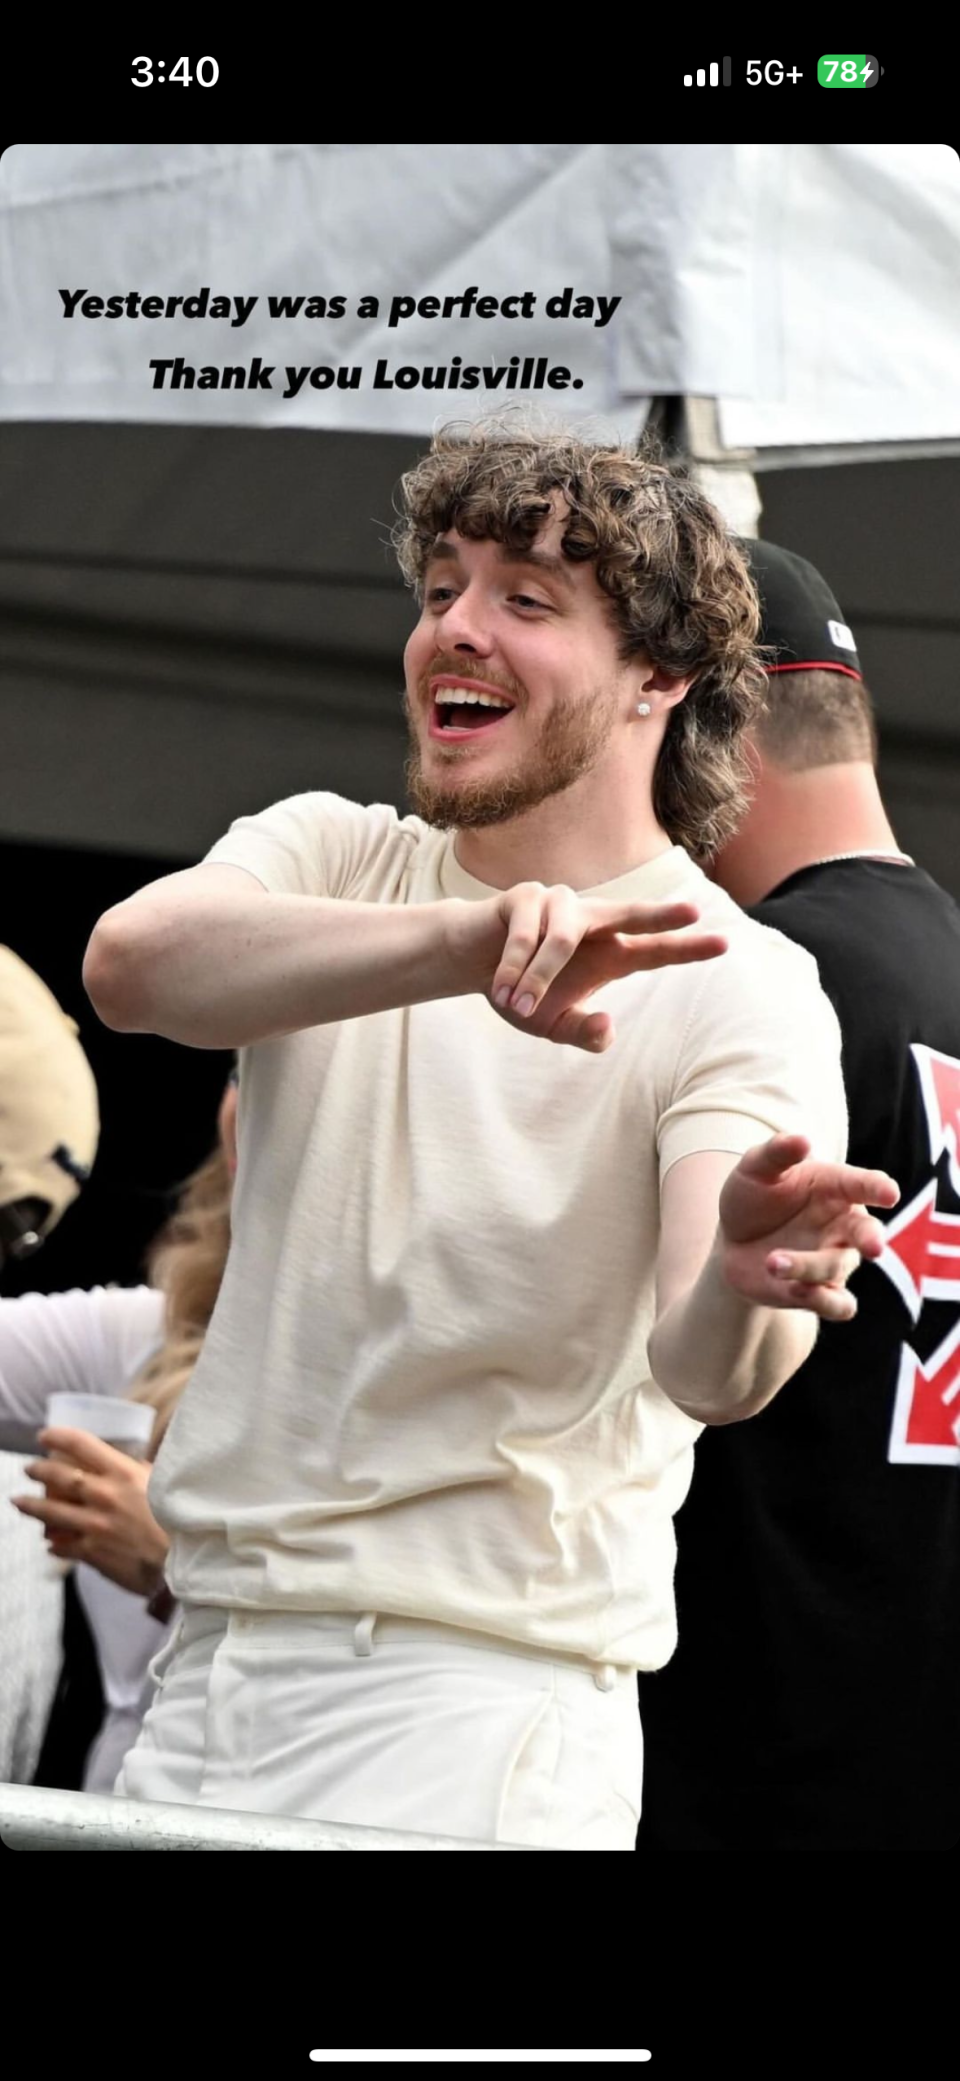 Jack Harlow's Gazebo Festival had to cancel Sunday performances due to severe weather conditions impacting the region.